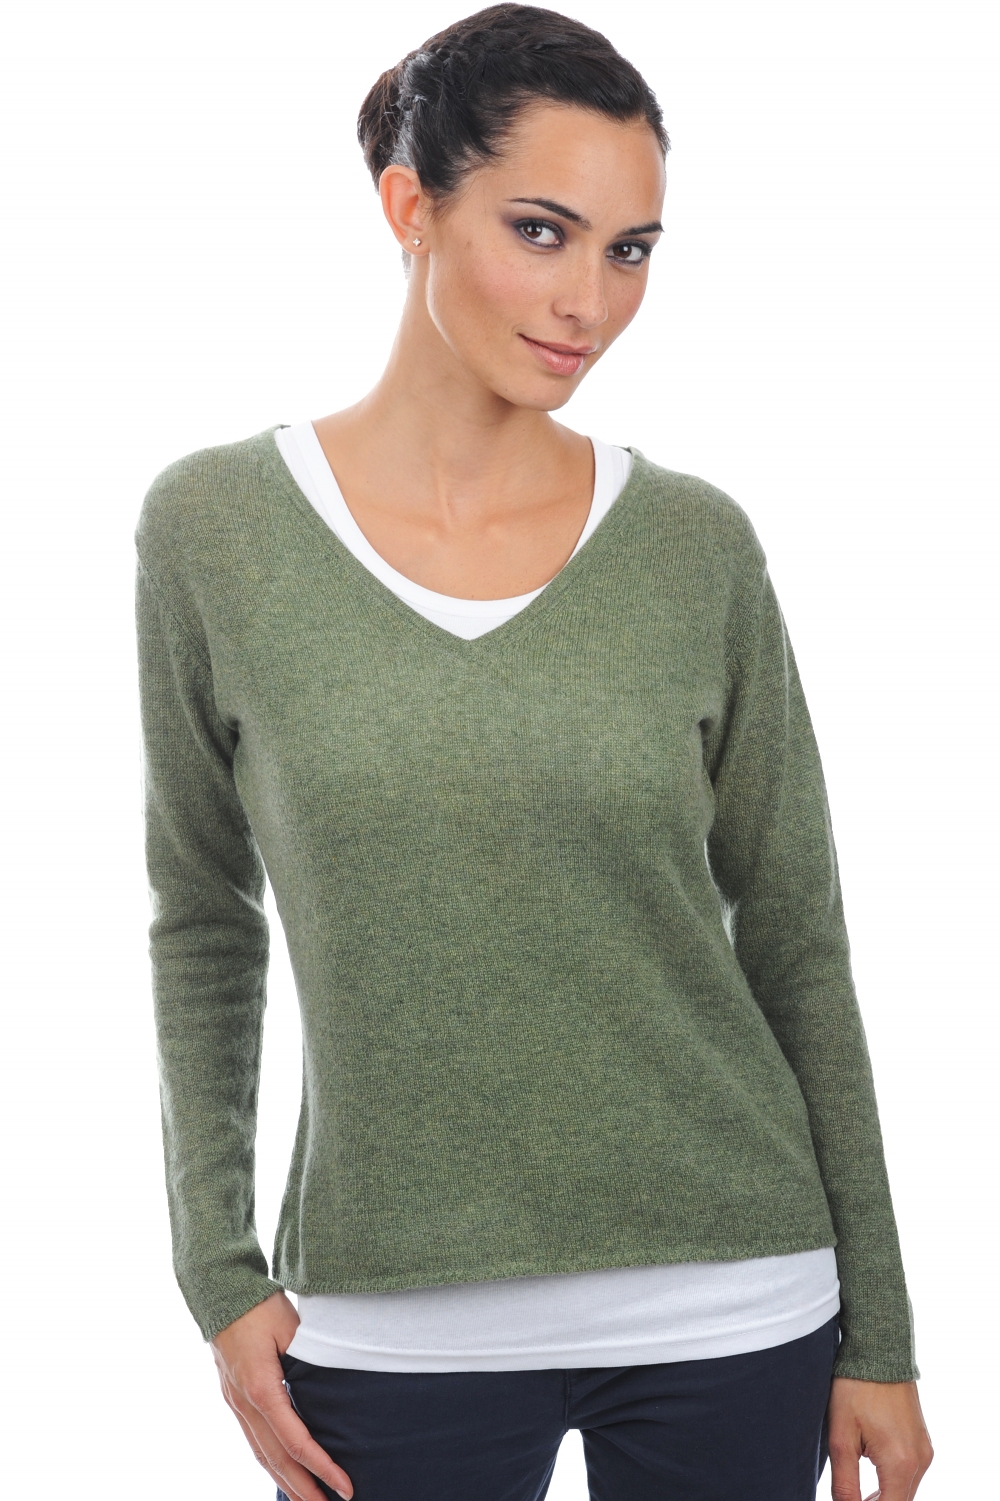 Cashmere ladies basic sweaters at low prices flavie olive chine m